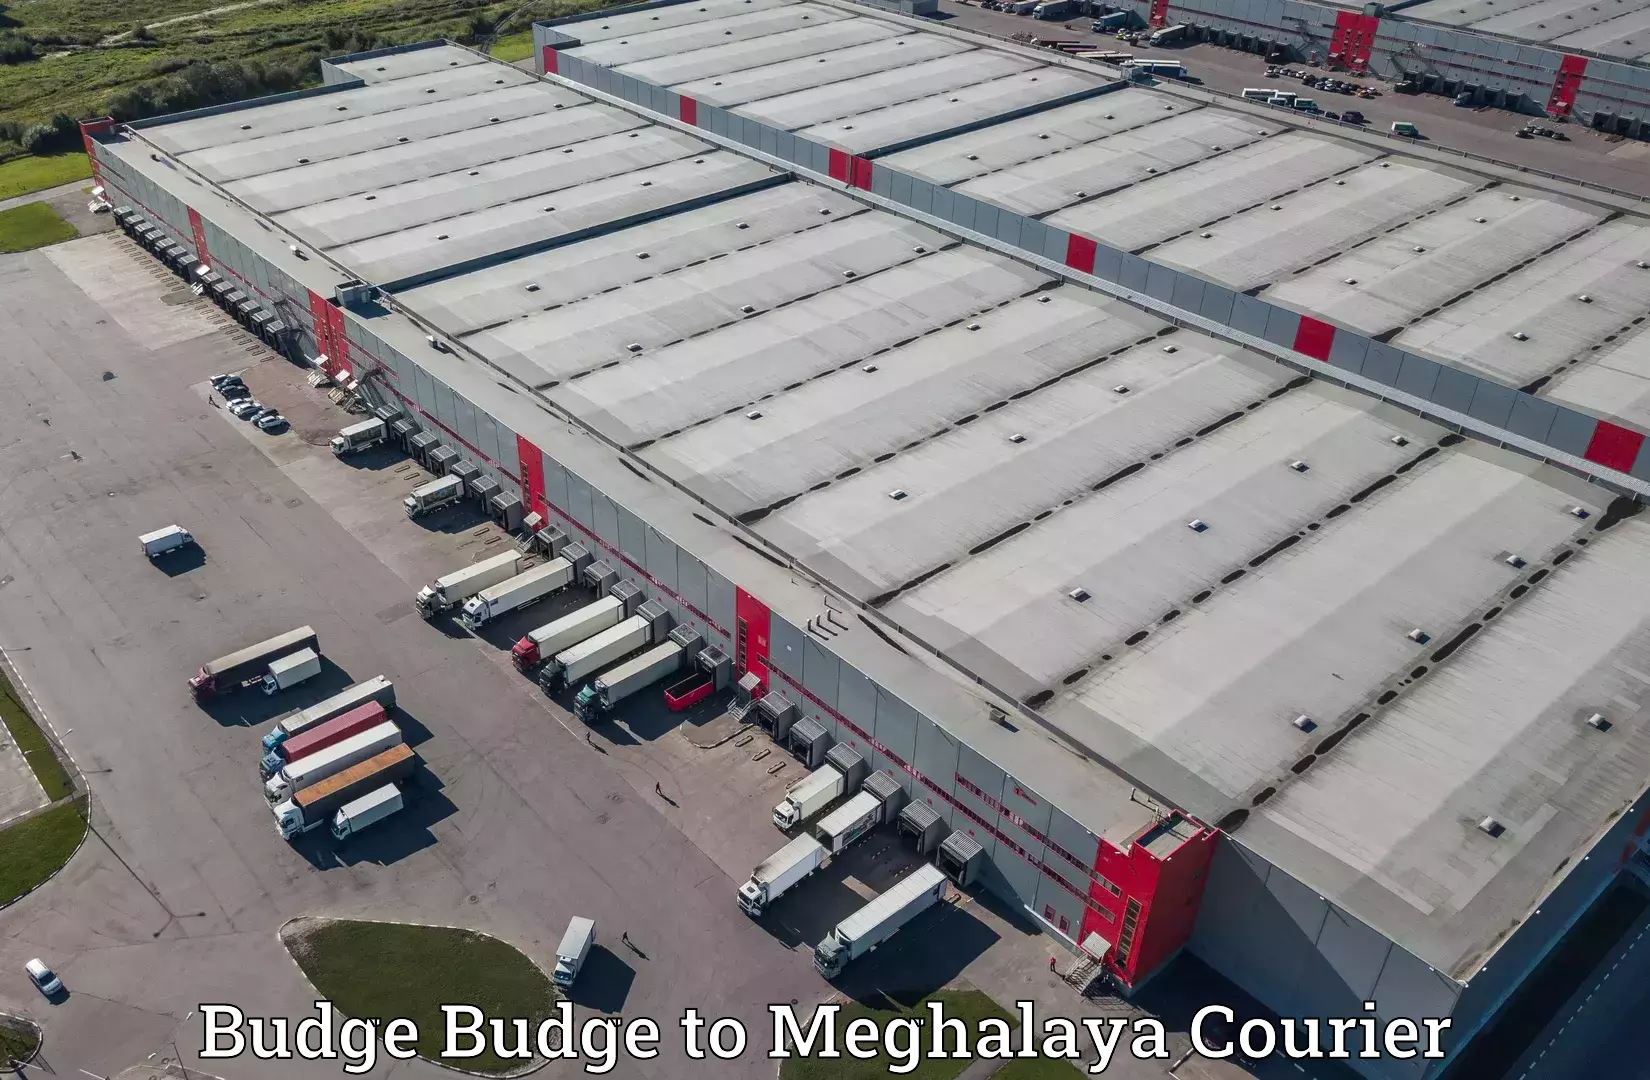 Automated parcel services Budge Budge to Meghalaya